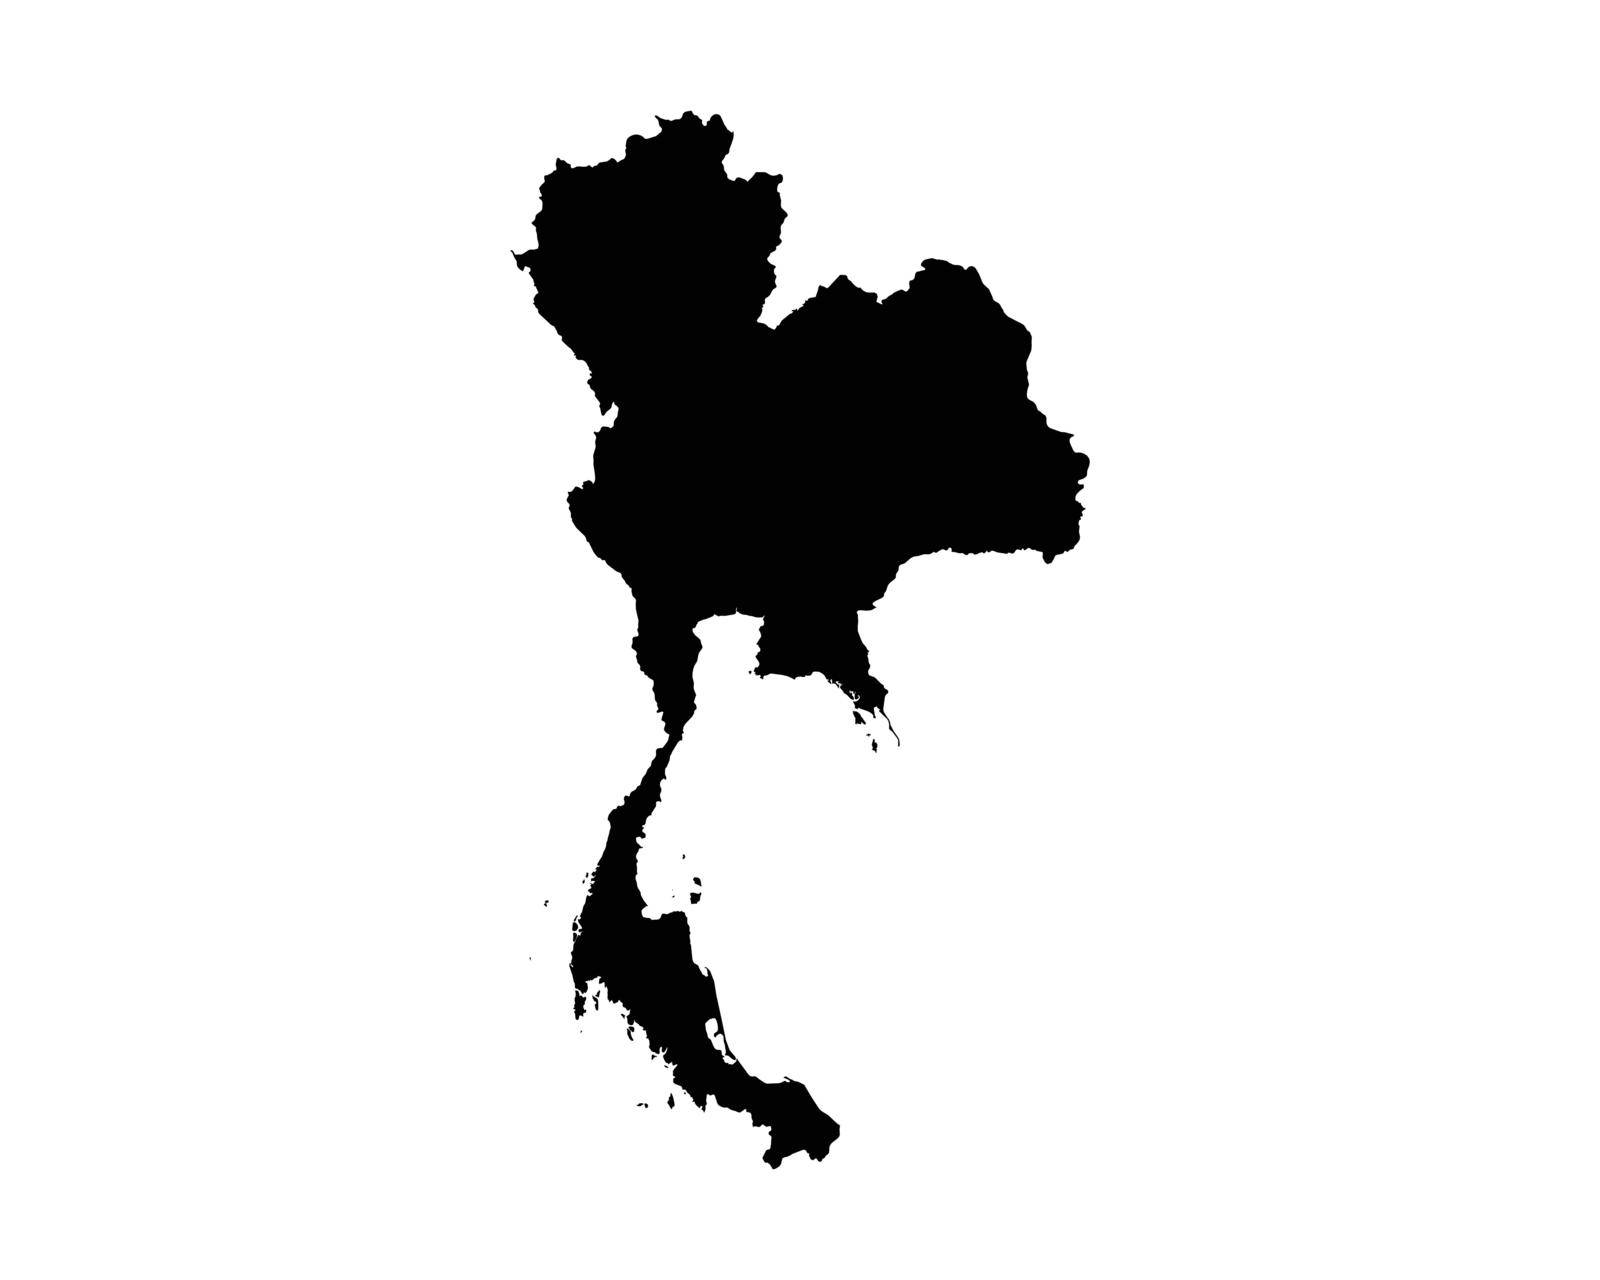 Thailand Map. Thai Country Map. Black and White Siam Siamese National Nation Geography Outline Border Boundary Territory Shape Vector Illustration EPS Clipart